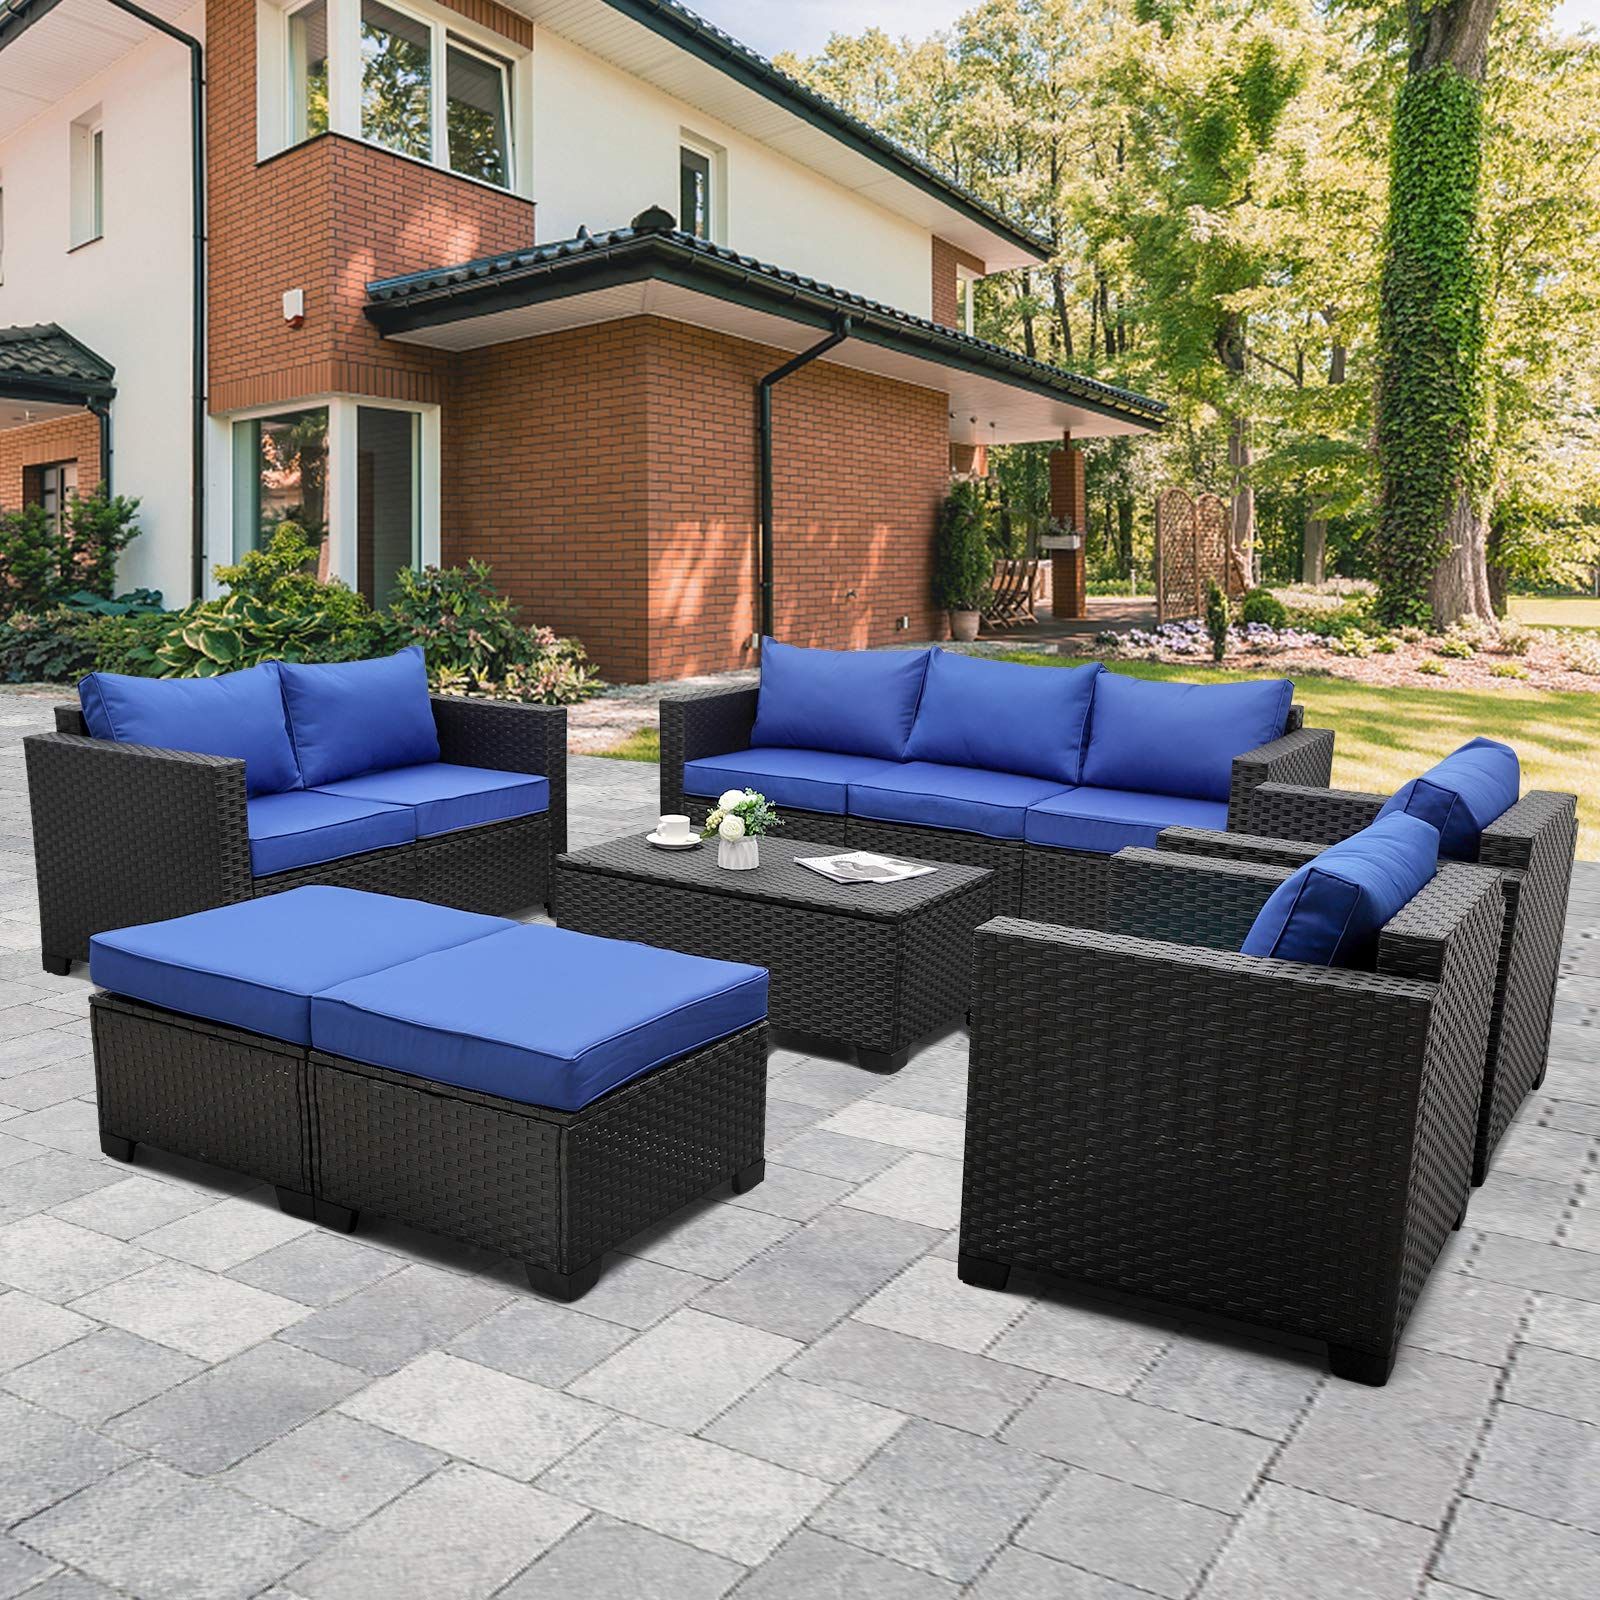 Widely Used Amazon: Rattaner Patio Pe Wicker Furniture Set 7 Pieces Outdoor Black  Rattan Conversation Seat Couch Sofa Chair Set With Royal Blue Cushion And  Furniture Covers : Patio, Lawn & Garden Inside Patio Rattan Wicker Furniture (Photo 1 of 15)